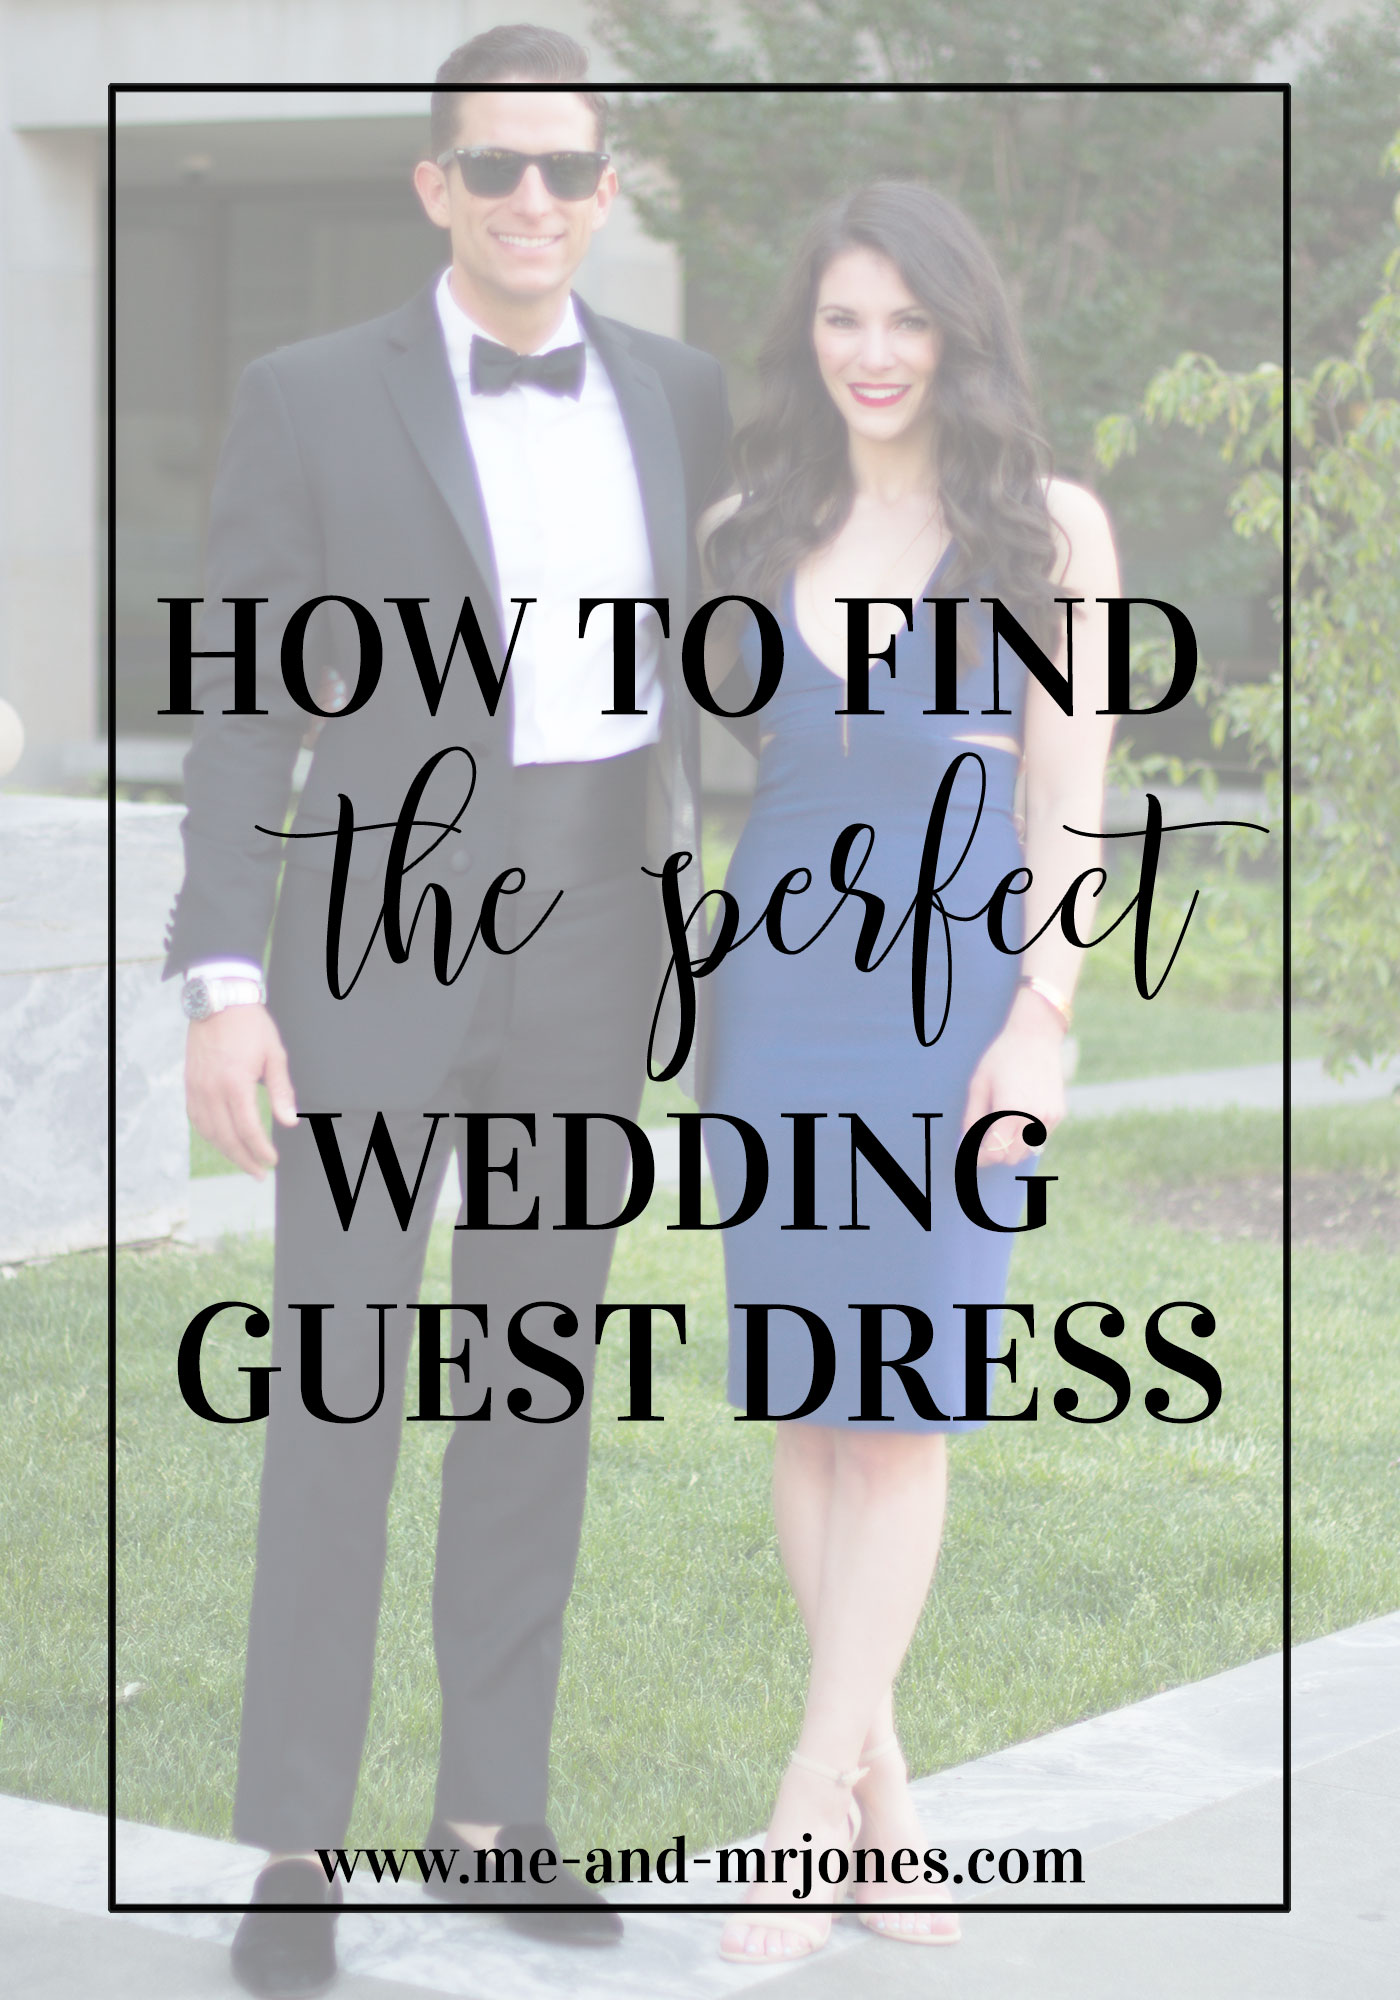 HOW TO FIND THE PERFECT WEDDING GUEST DRESS — Me and Mr. Jones